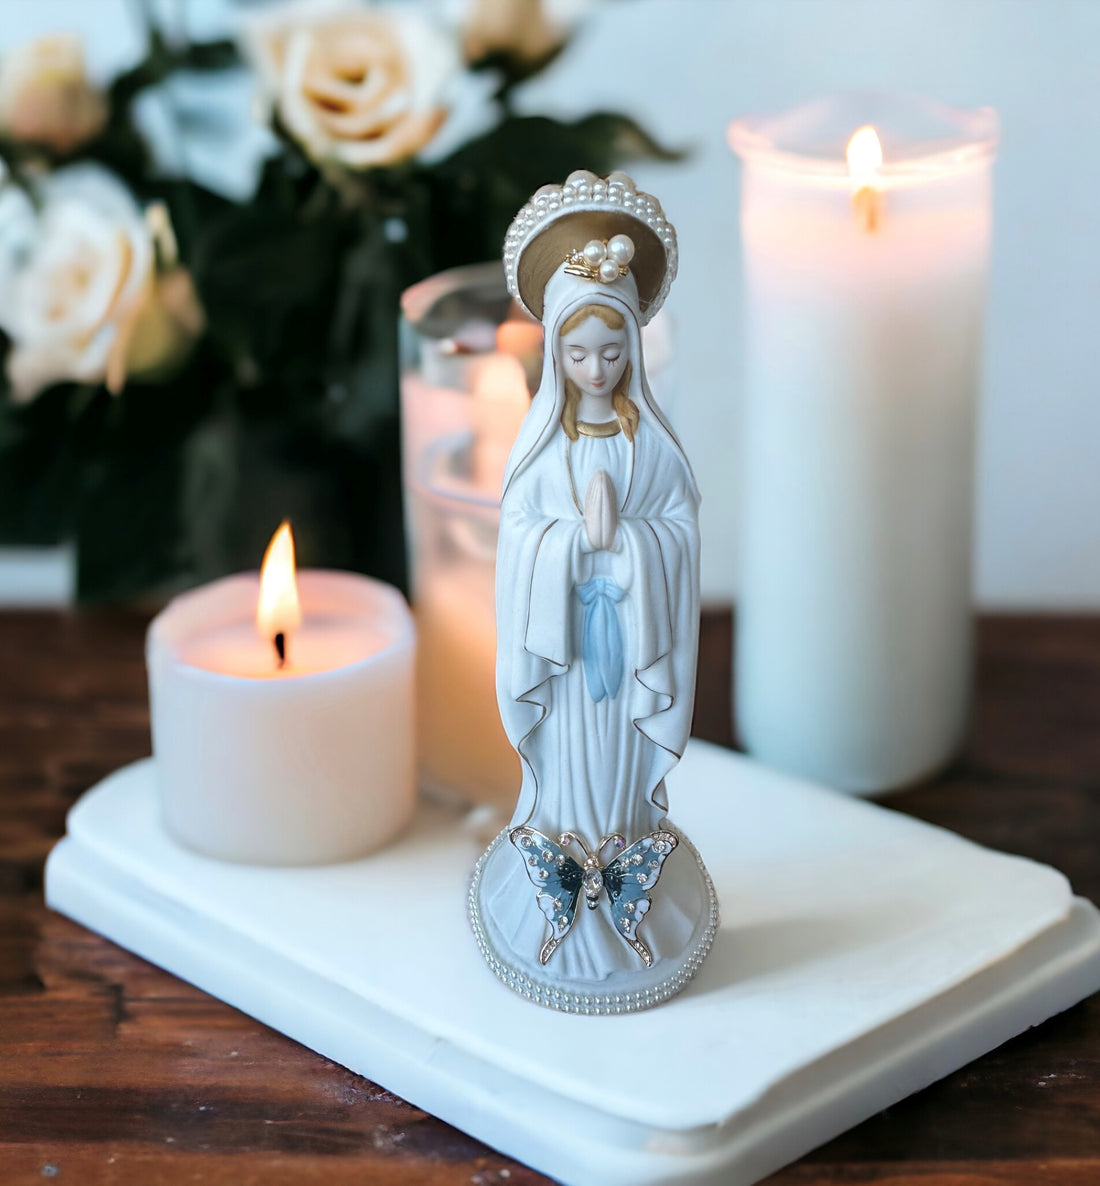 virgin mary, our lady of betania, our lady of fatima statue, our lady virgin mary art, catholic art, catholic statue, mary statue, mary figurine, mary porcelain, our lady of lourdes, our lady of guadalupe, catholic gifts, easter gifts, lent gift, baptism gift, christening gift, mother mary statue, catholic gifts for her